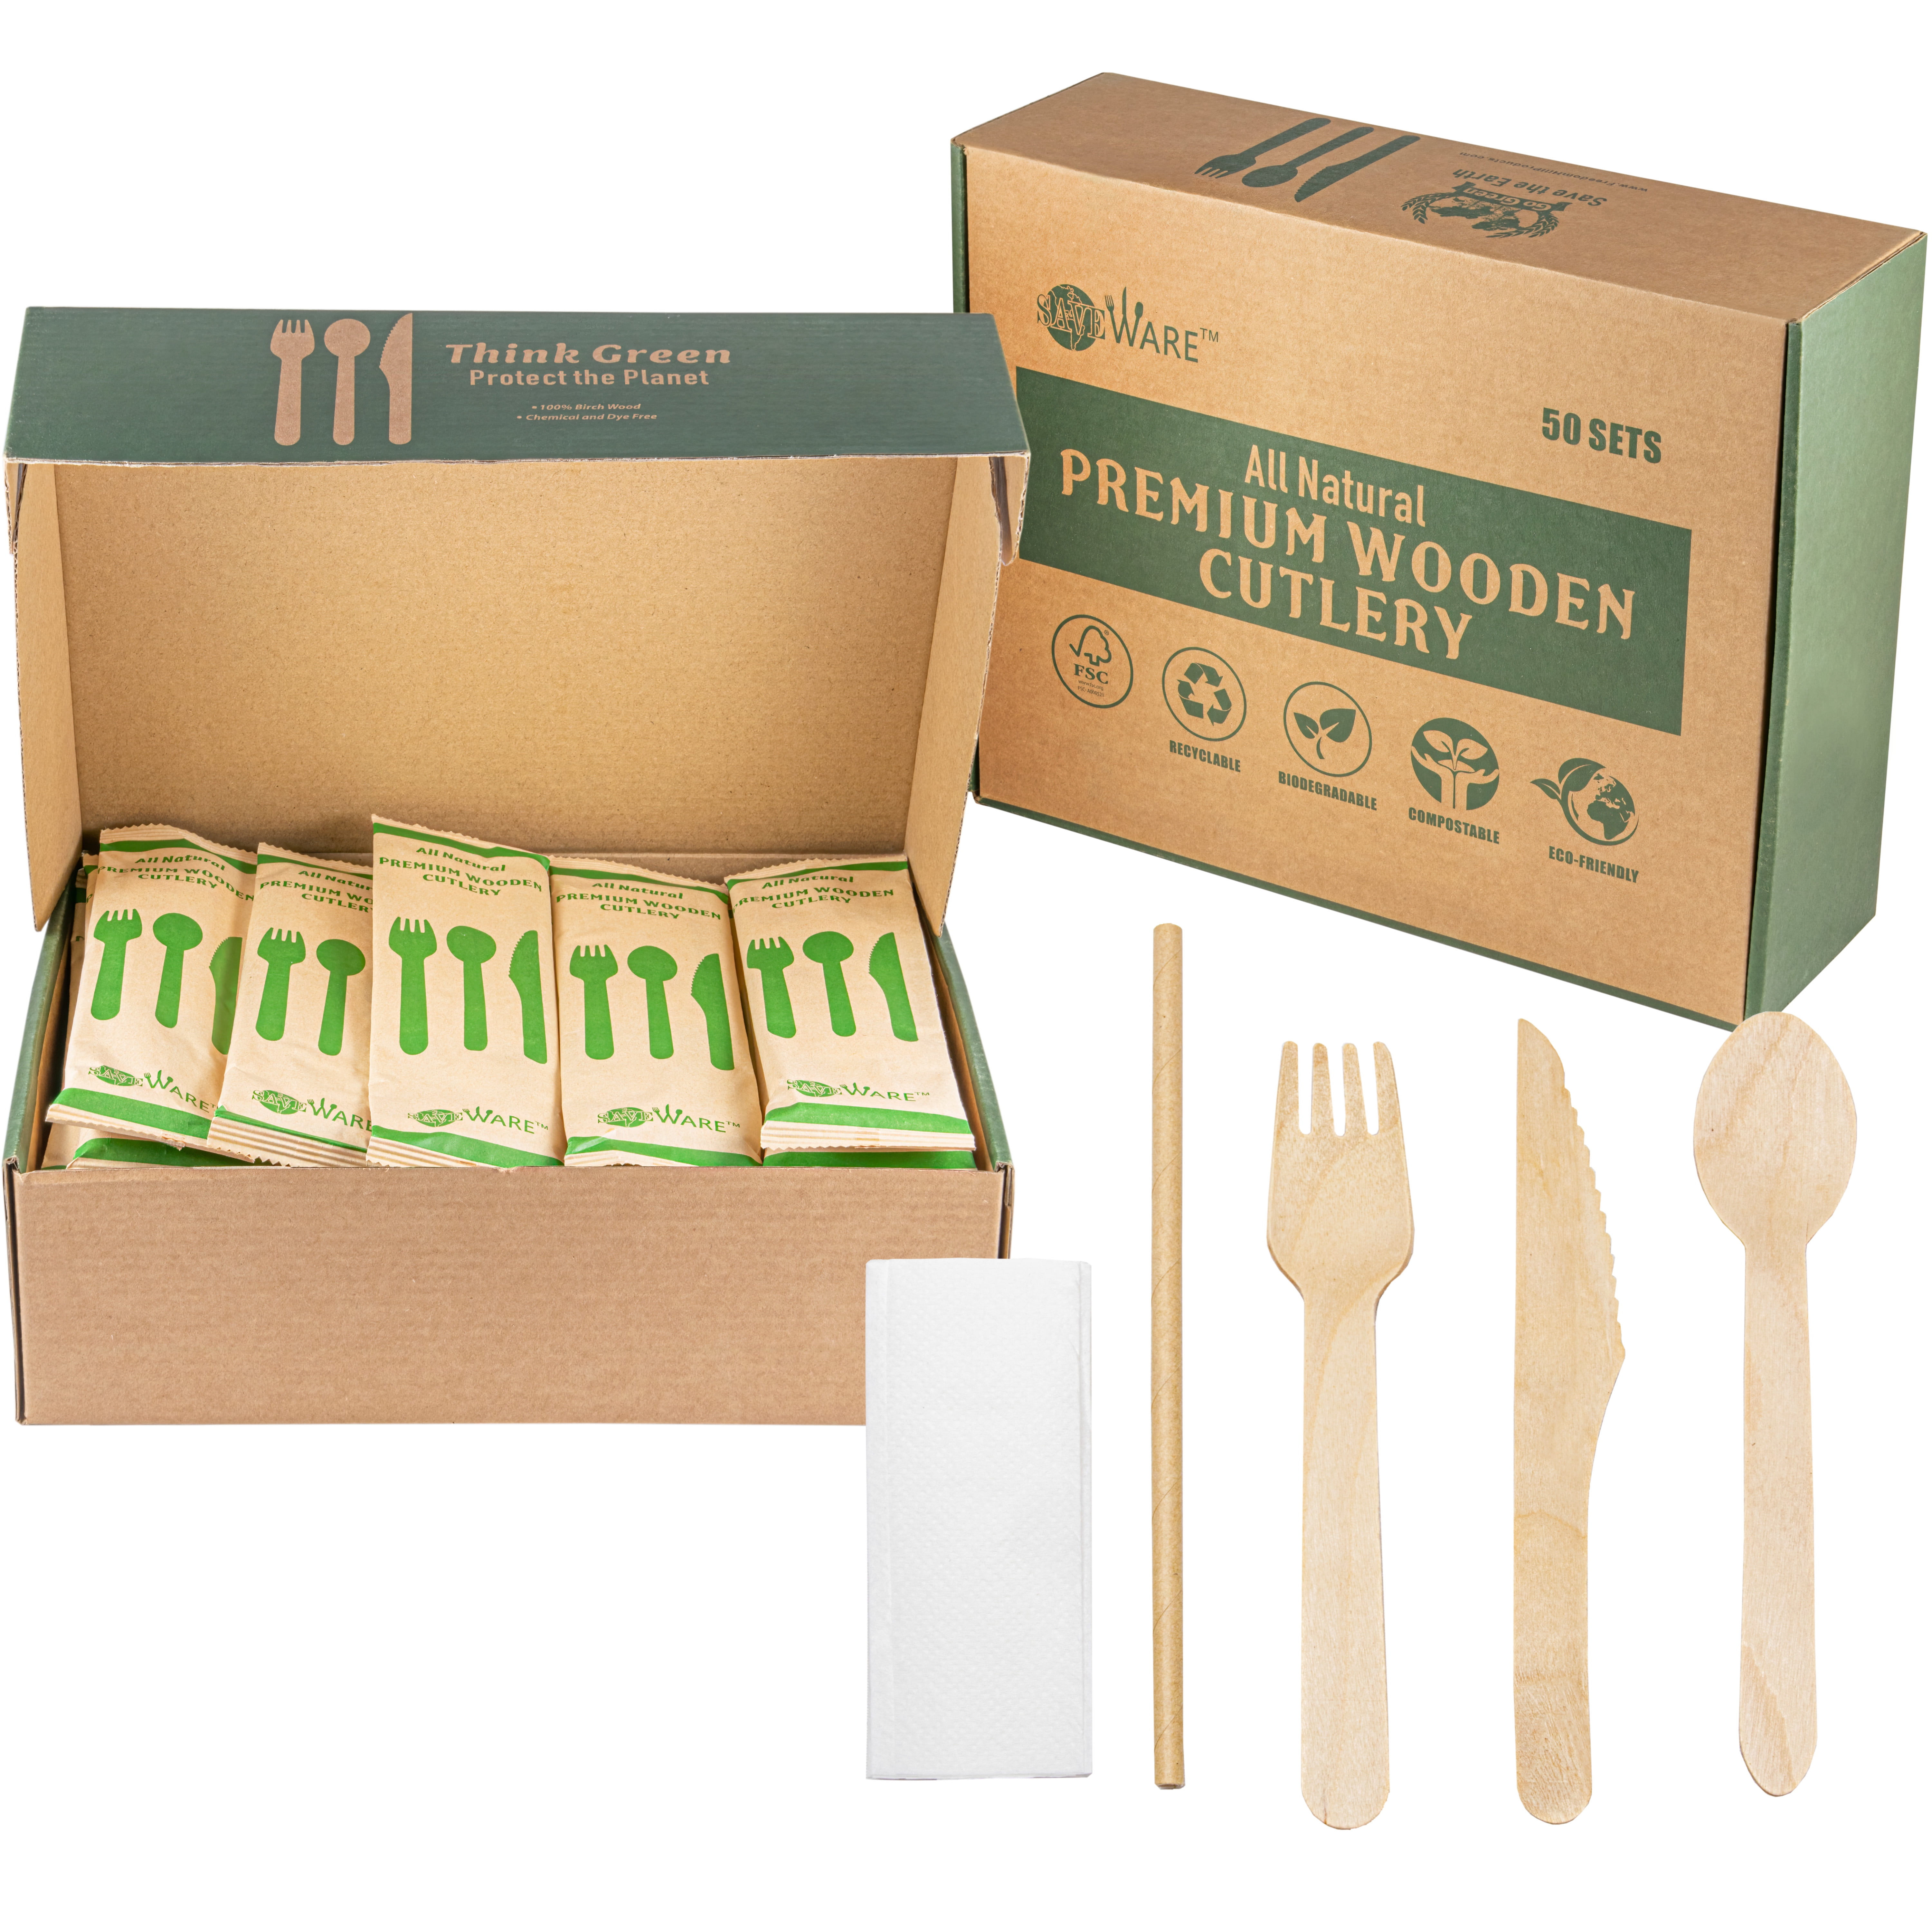 Details about   Nature Wooden Cutlery Set Vintage Tableware Dinnerware Flatware with Pouch Kit 